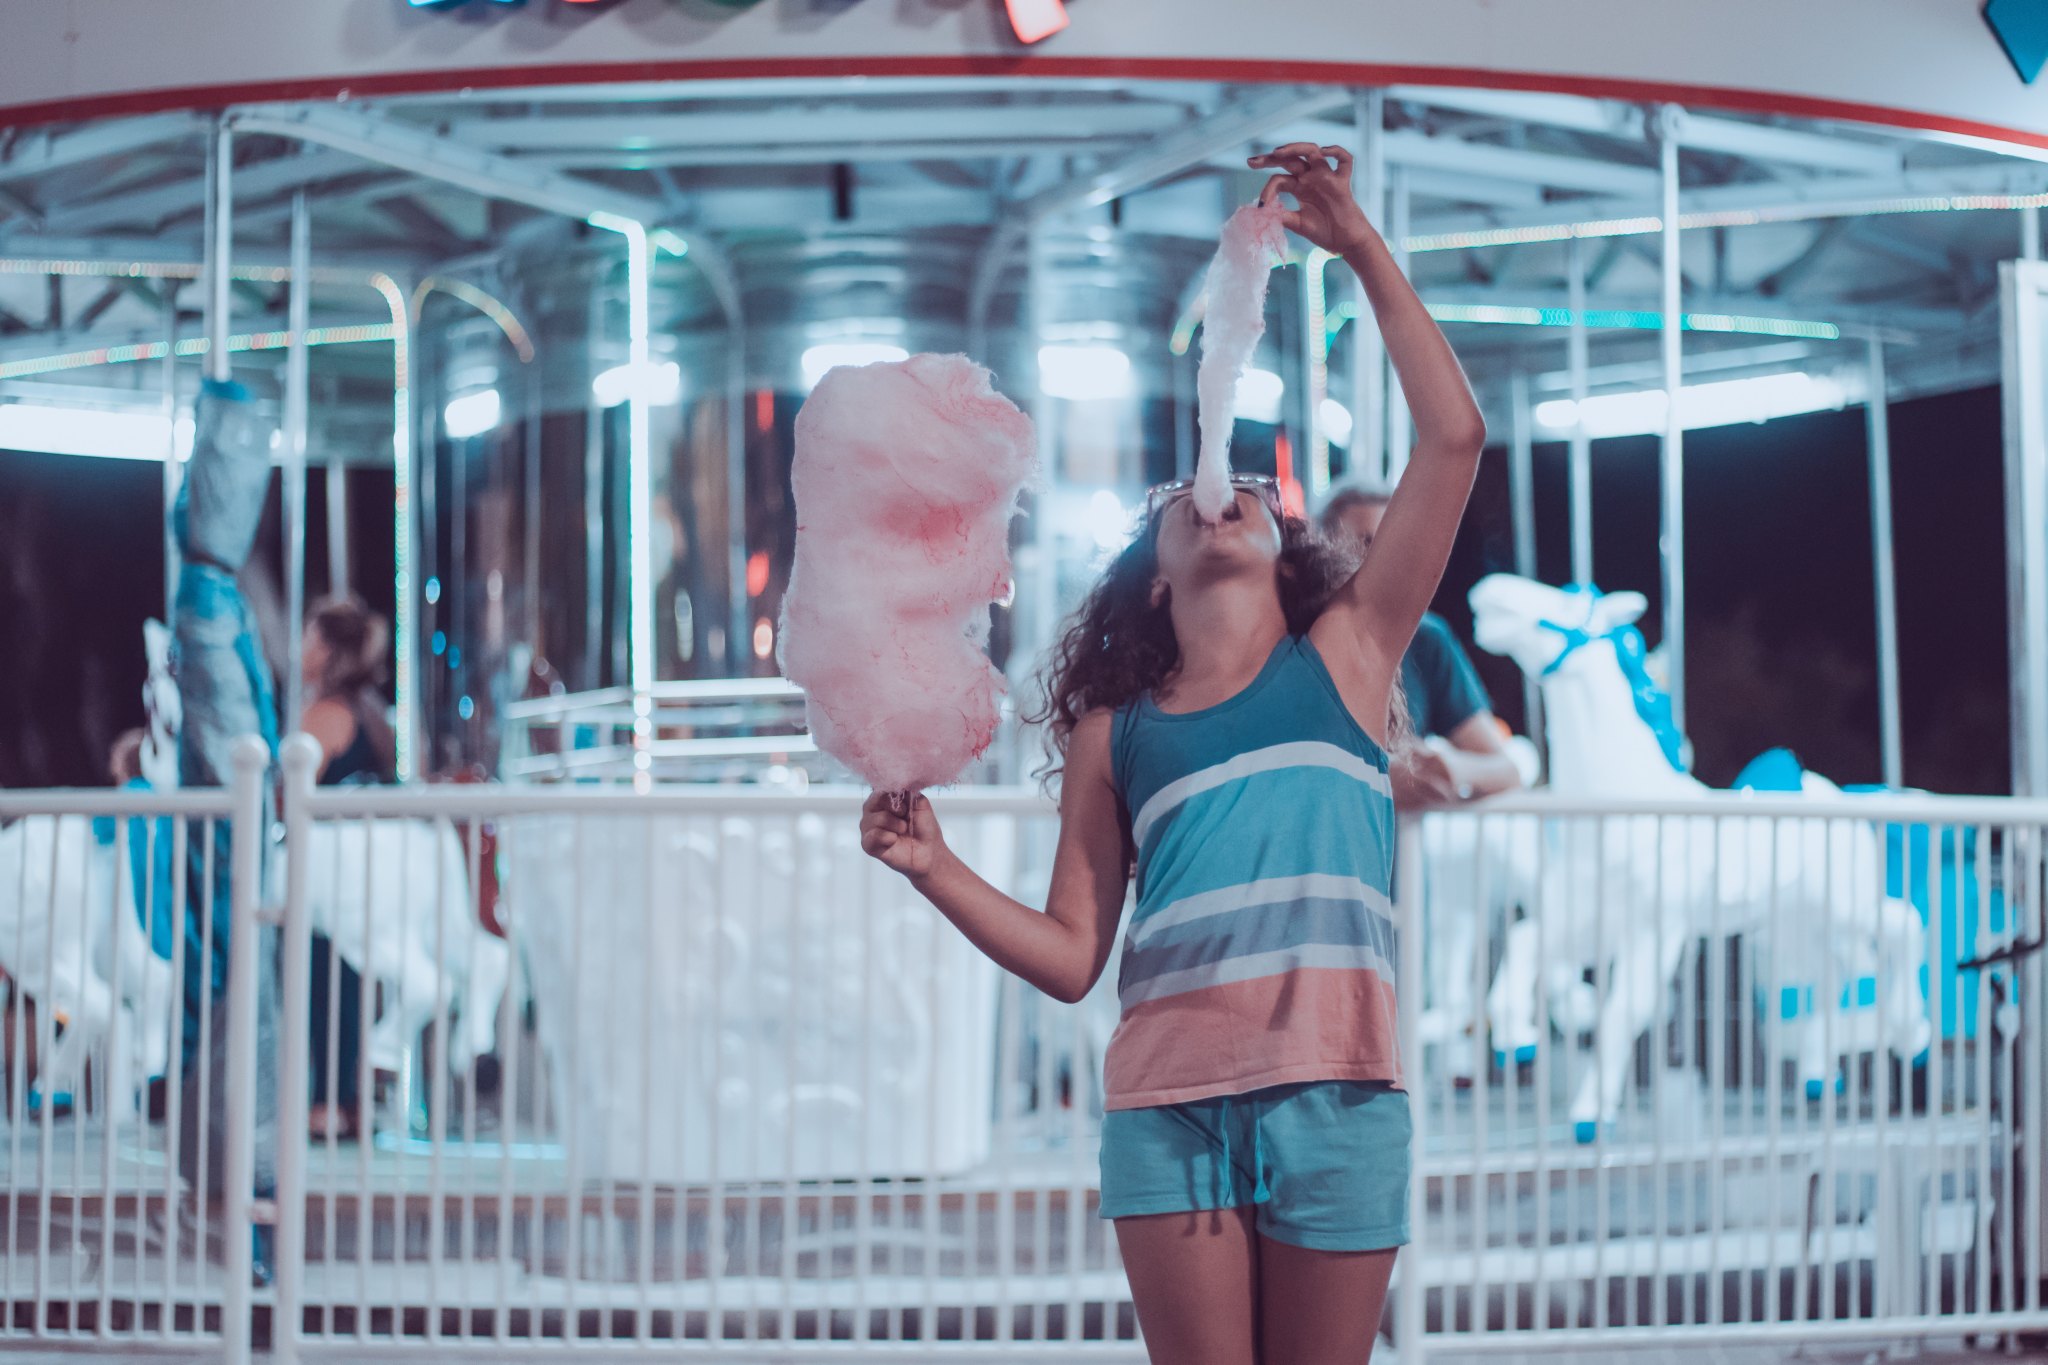 girl eating cotton candy